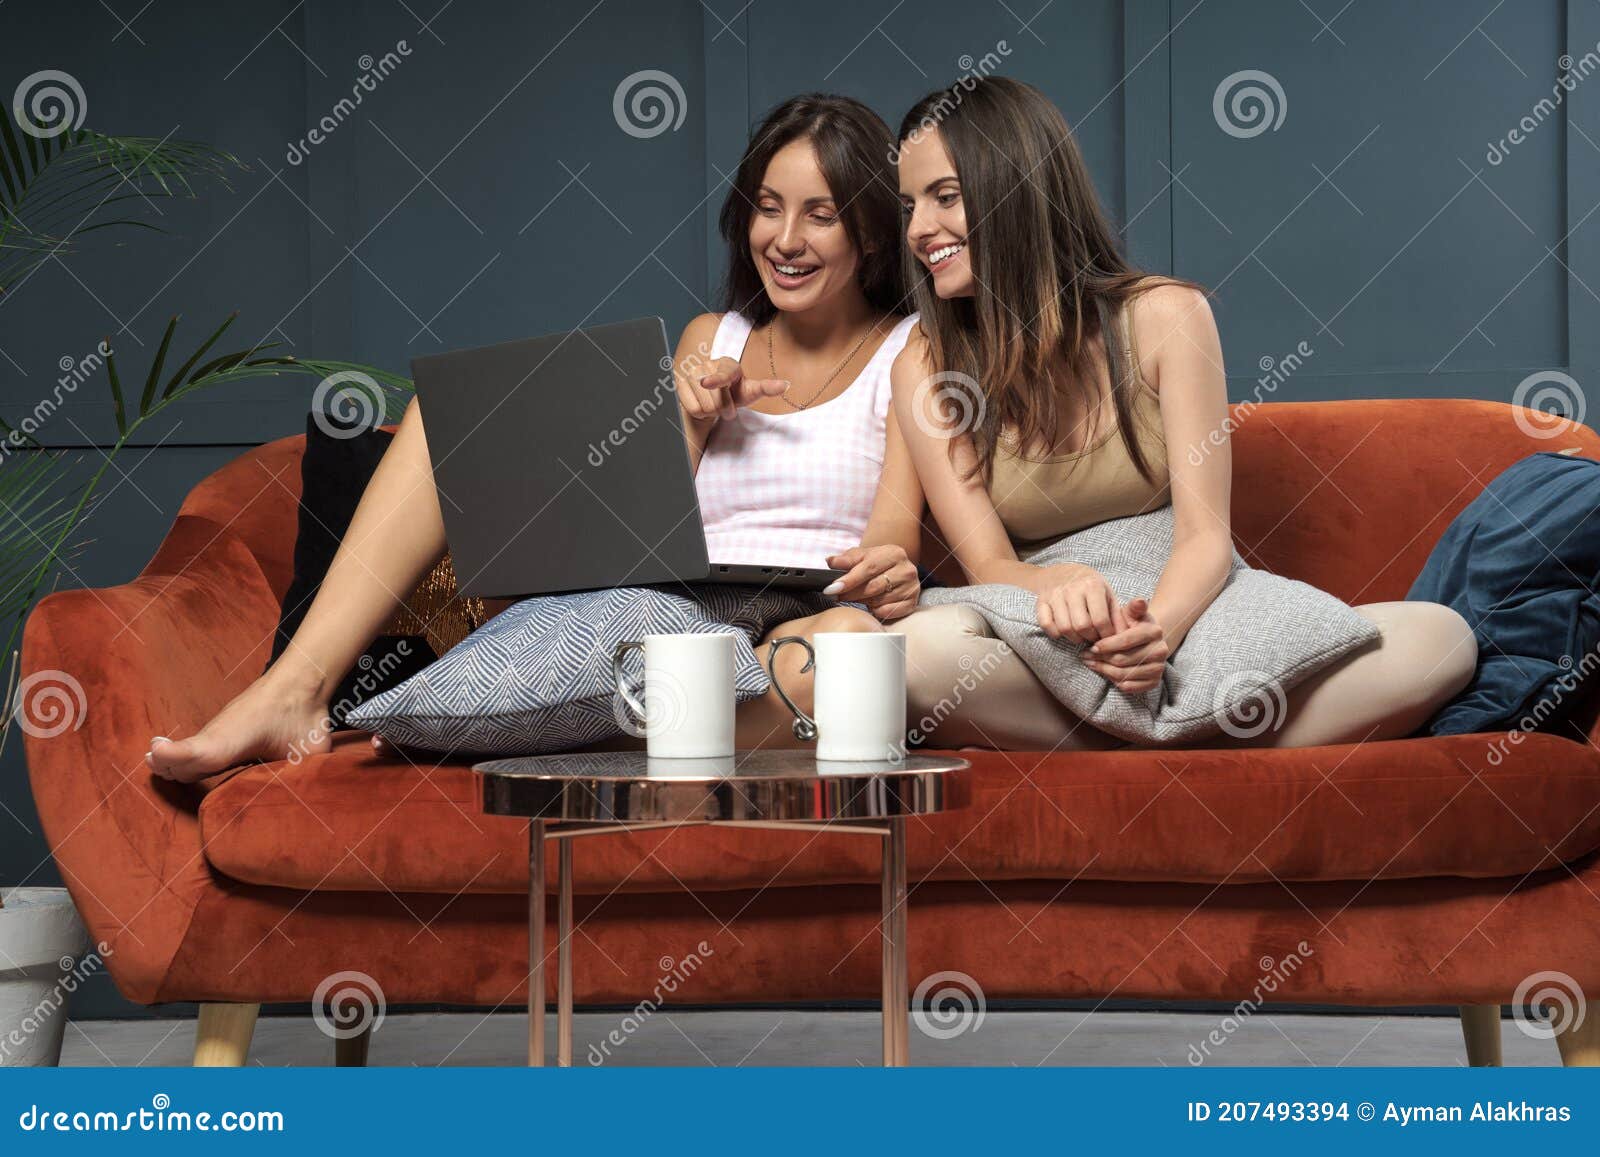 Two Young Women Watching Something Funny on Laptop and Laughing at Home ...